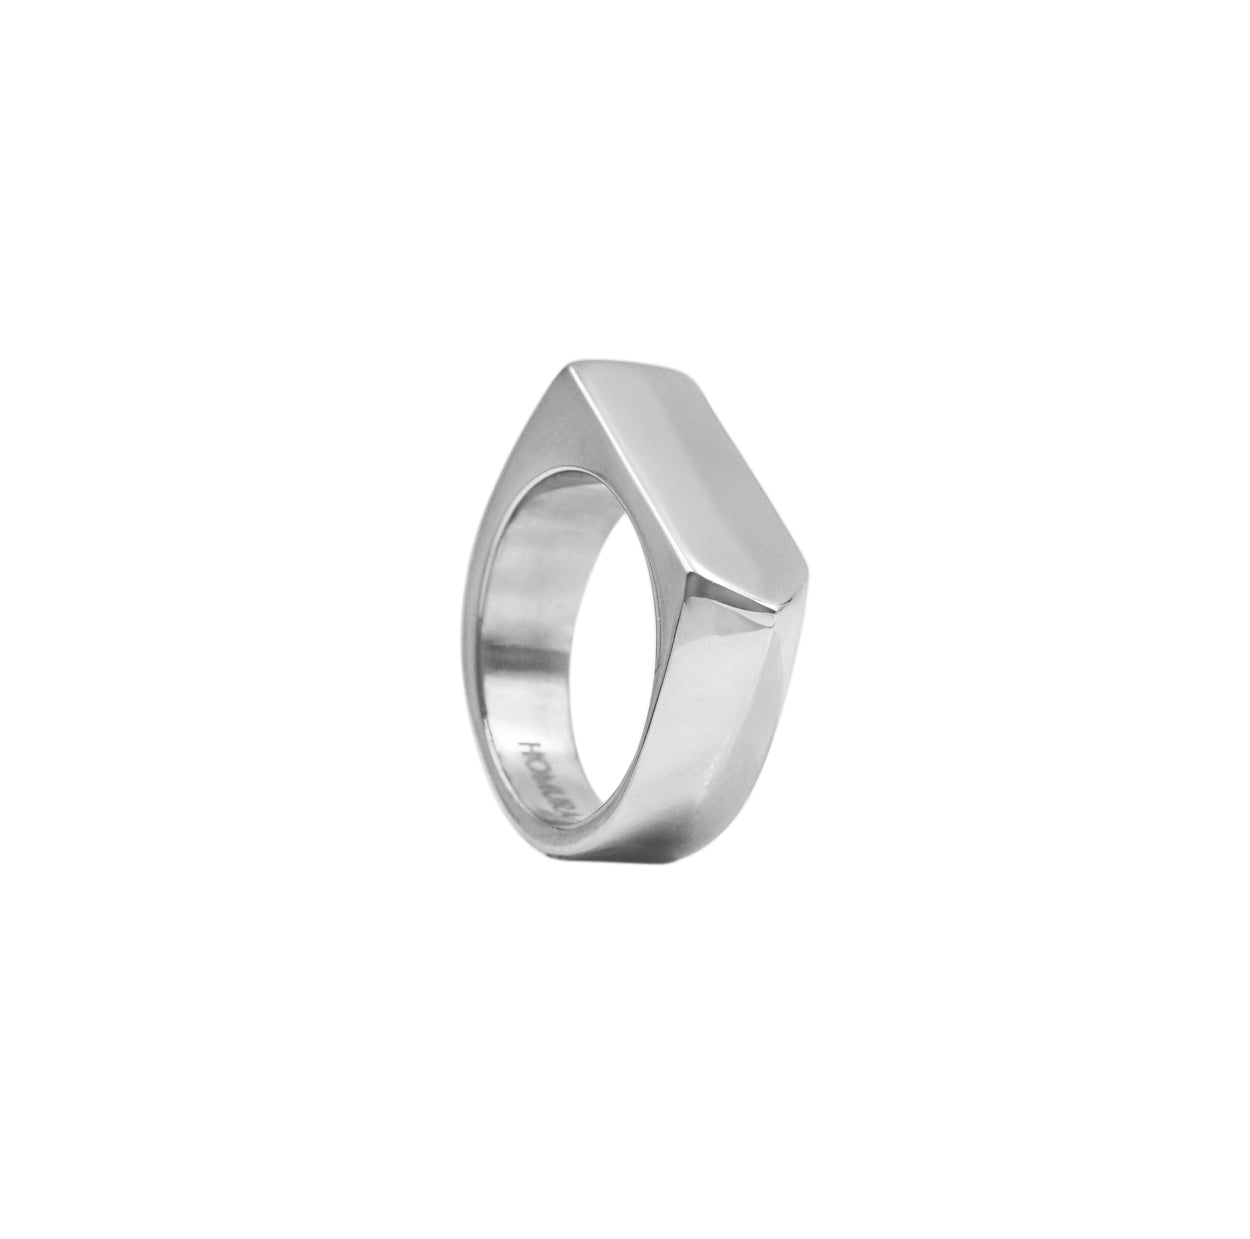 Stag® Ring, Silver